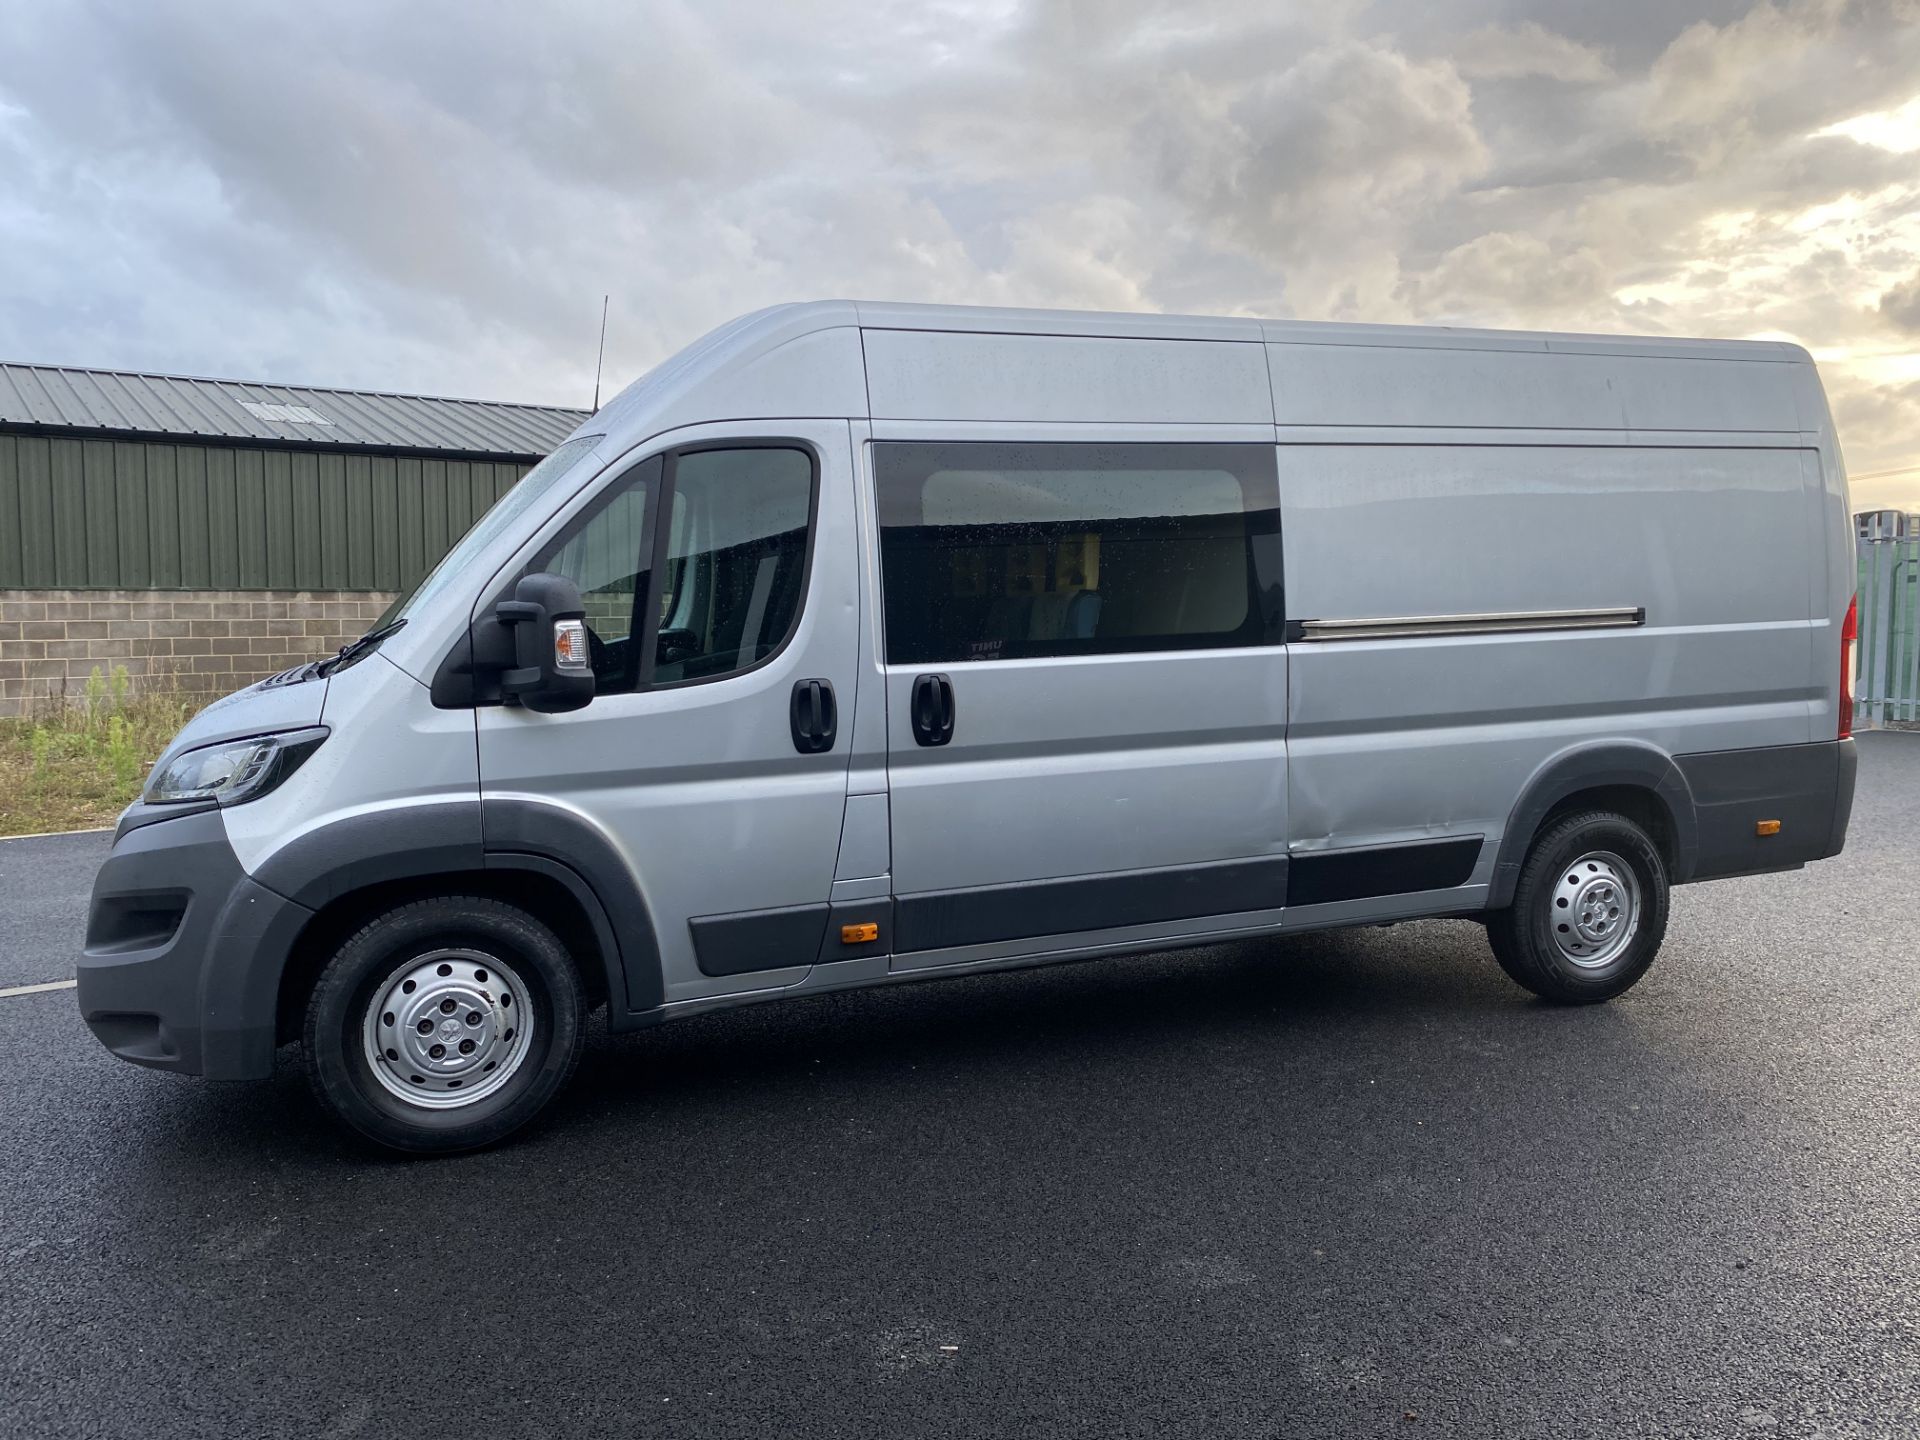 (On Sale) PEUGEOT BOXER 2.0HDI "(130) L4H2 EXTRA LONG WHEEL BASE CREW VAN - (2017 EURO 6) - AIR CON - Image 5 of 22